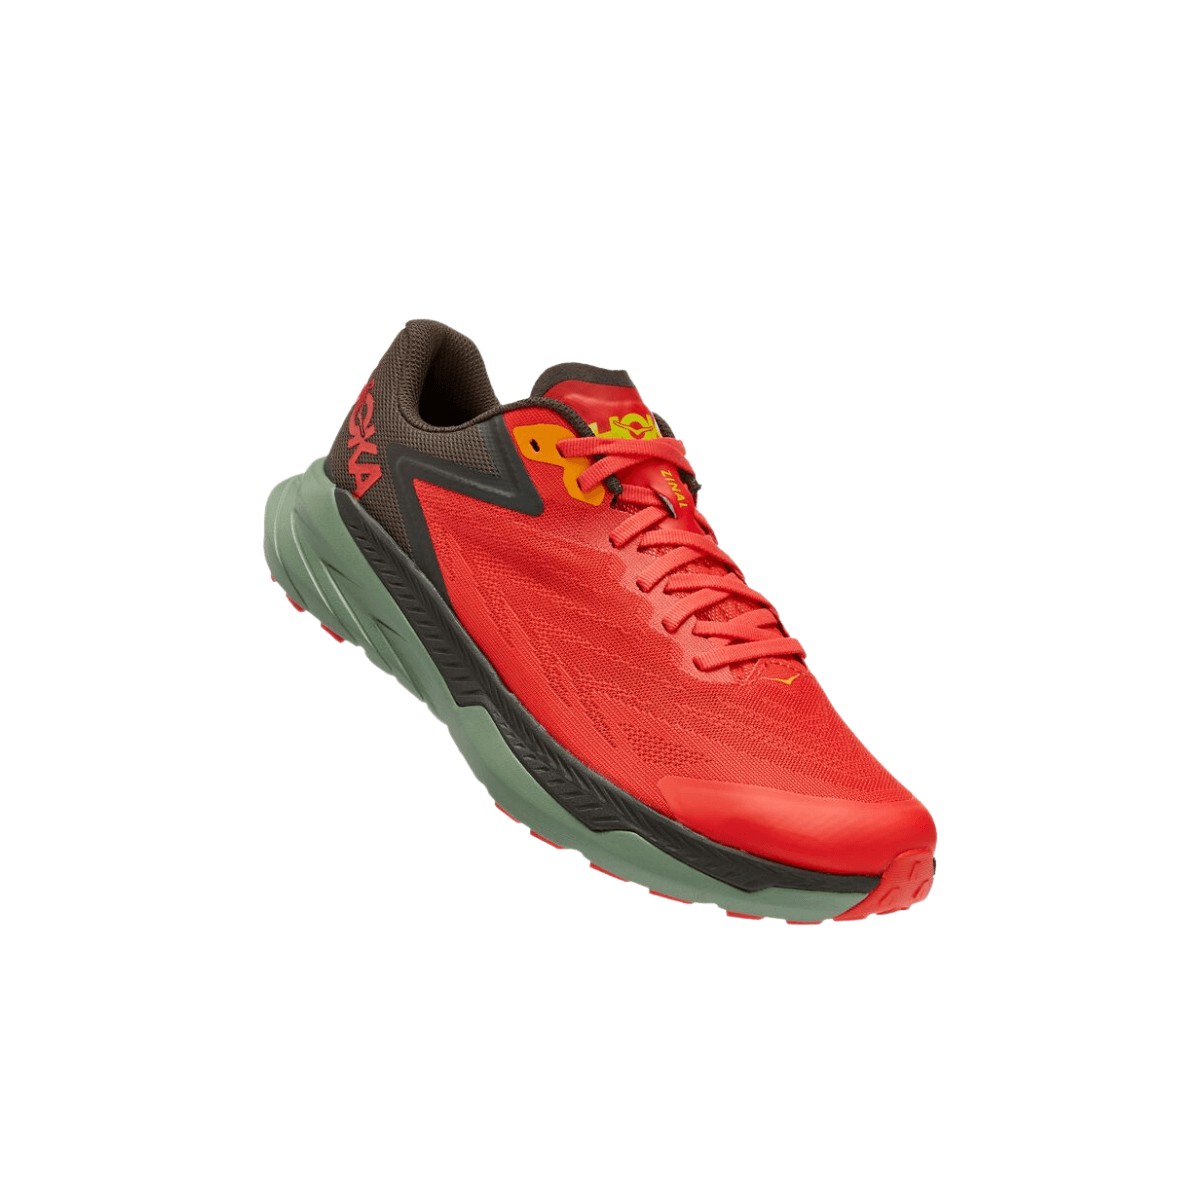 Hoka One One Zinal Chaussures Rouge Olive Vert AW22, Taille EU 42